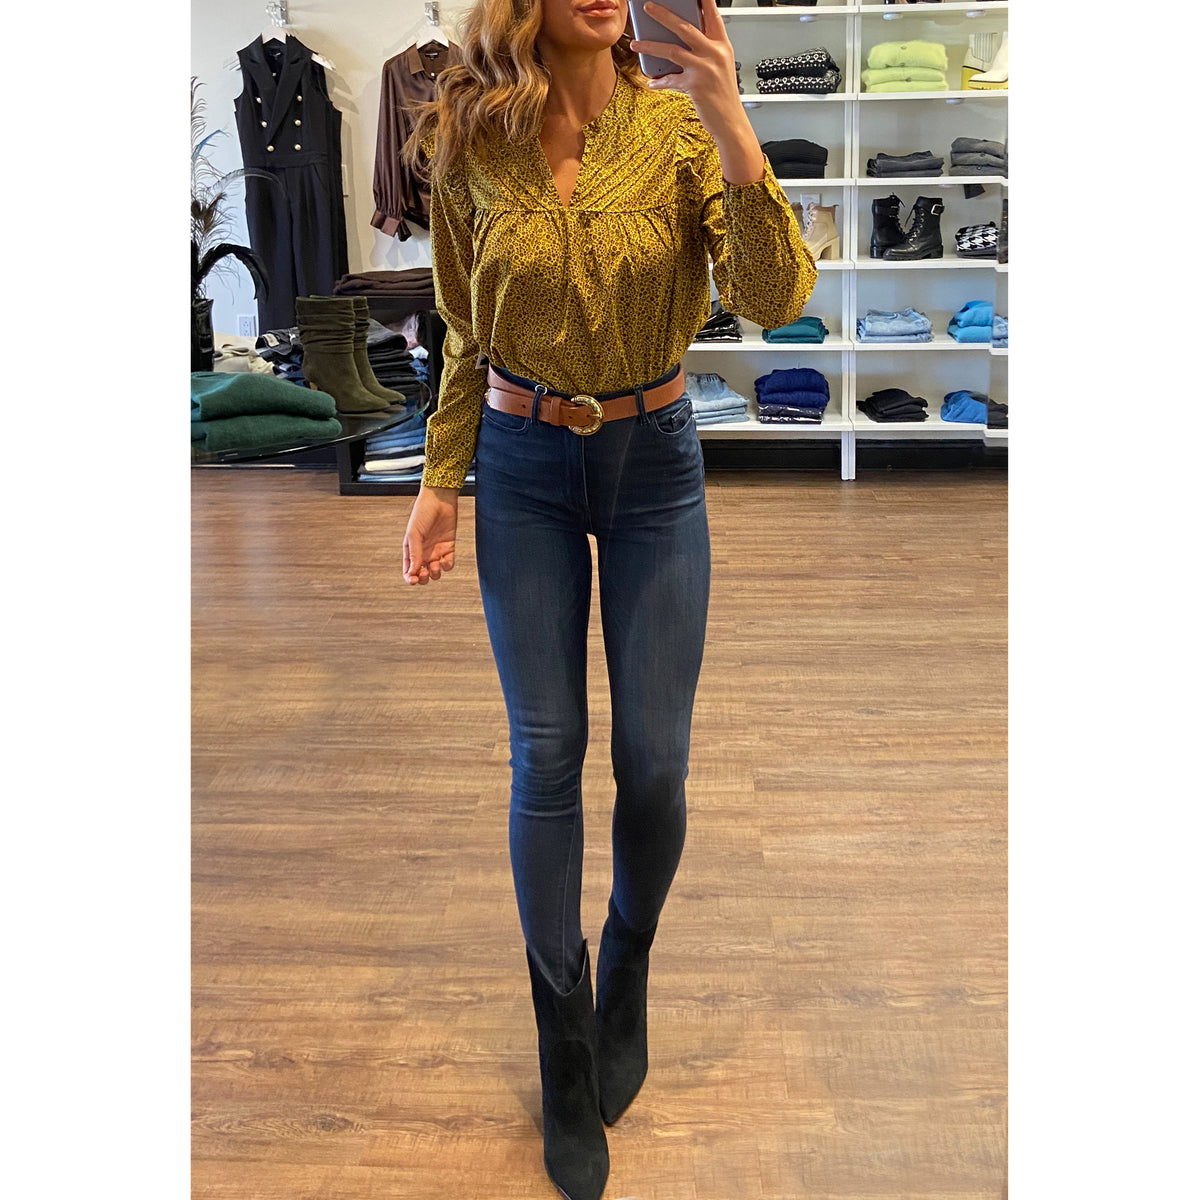 Nation LTD Tilly A Line Ruffle Top in Citrine Floral